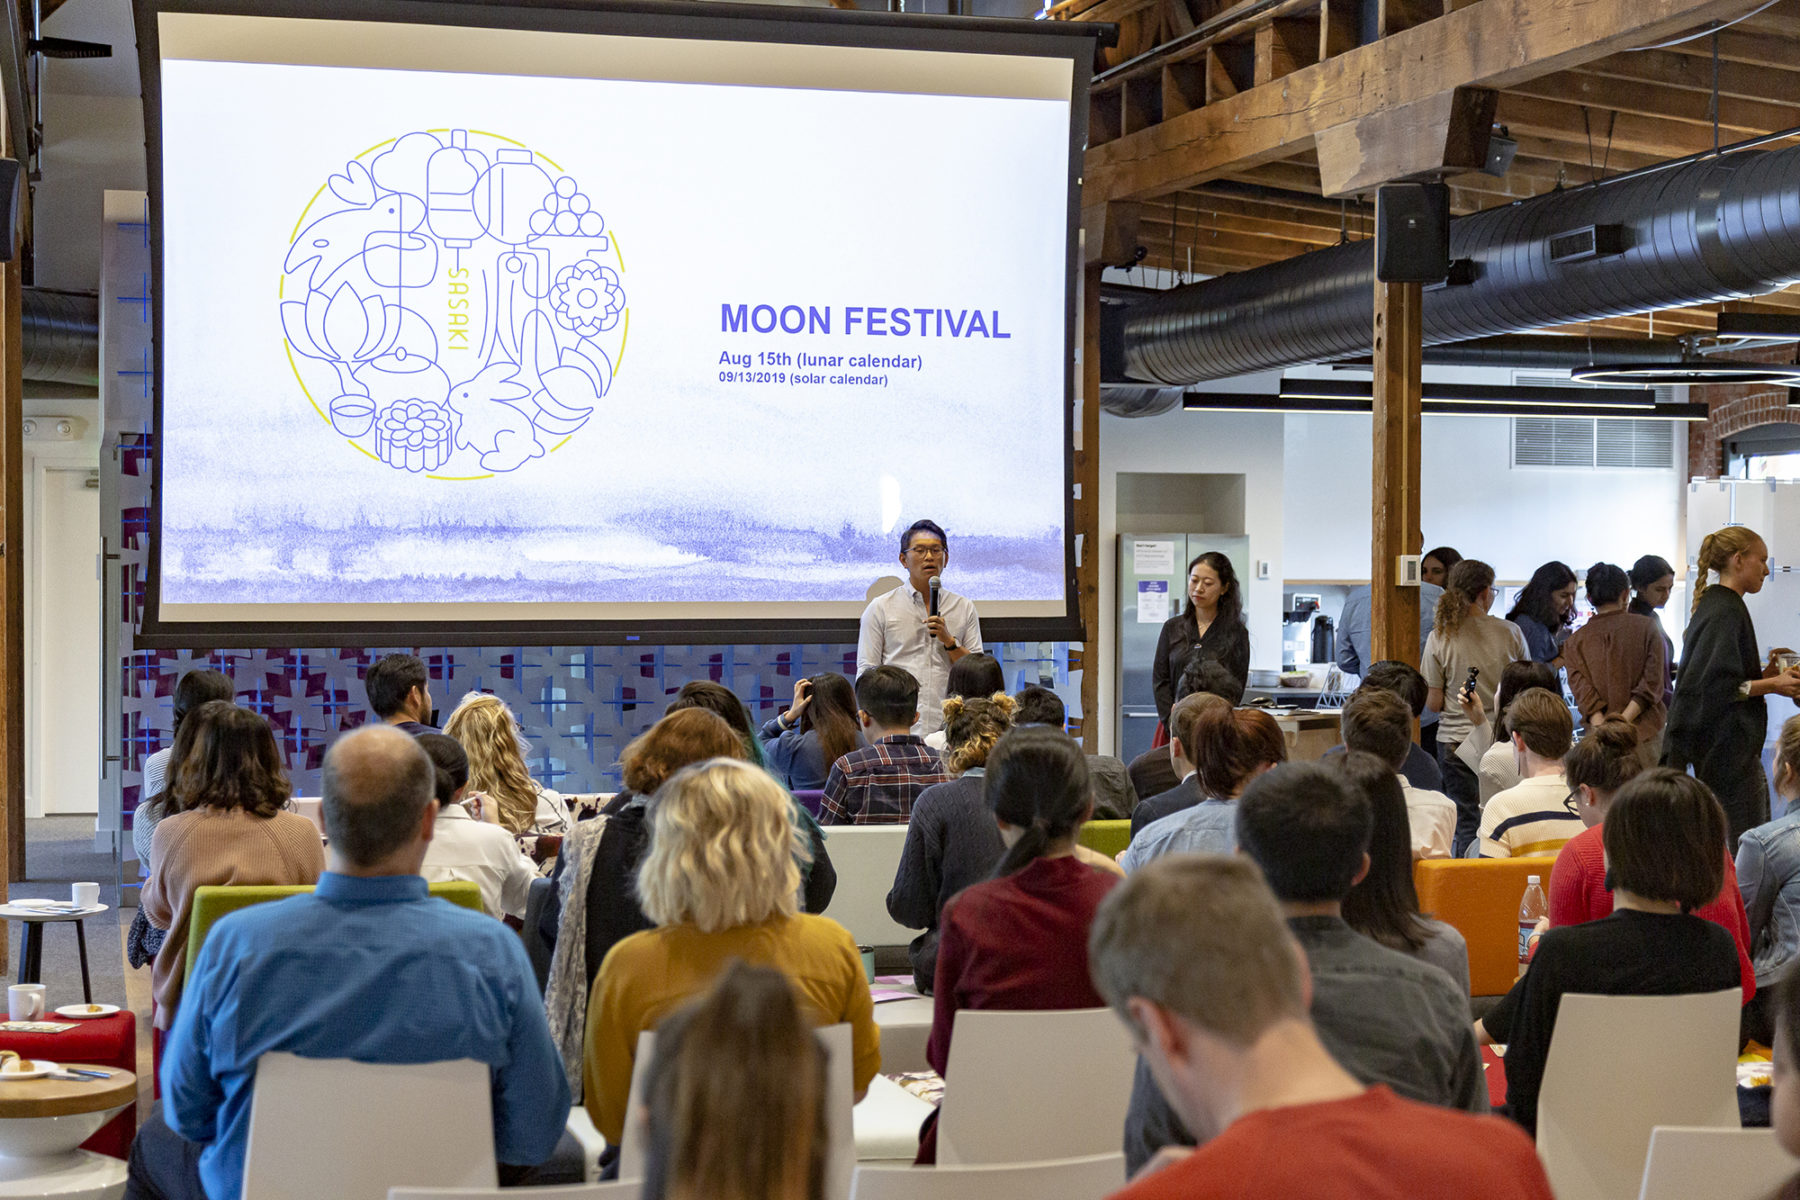 Photo of man addressing a group with Moon Festival graphic on large screen behind him